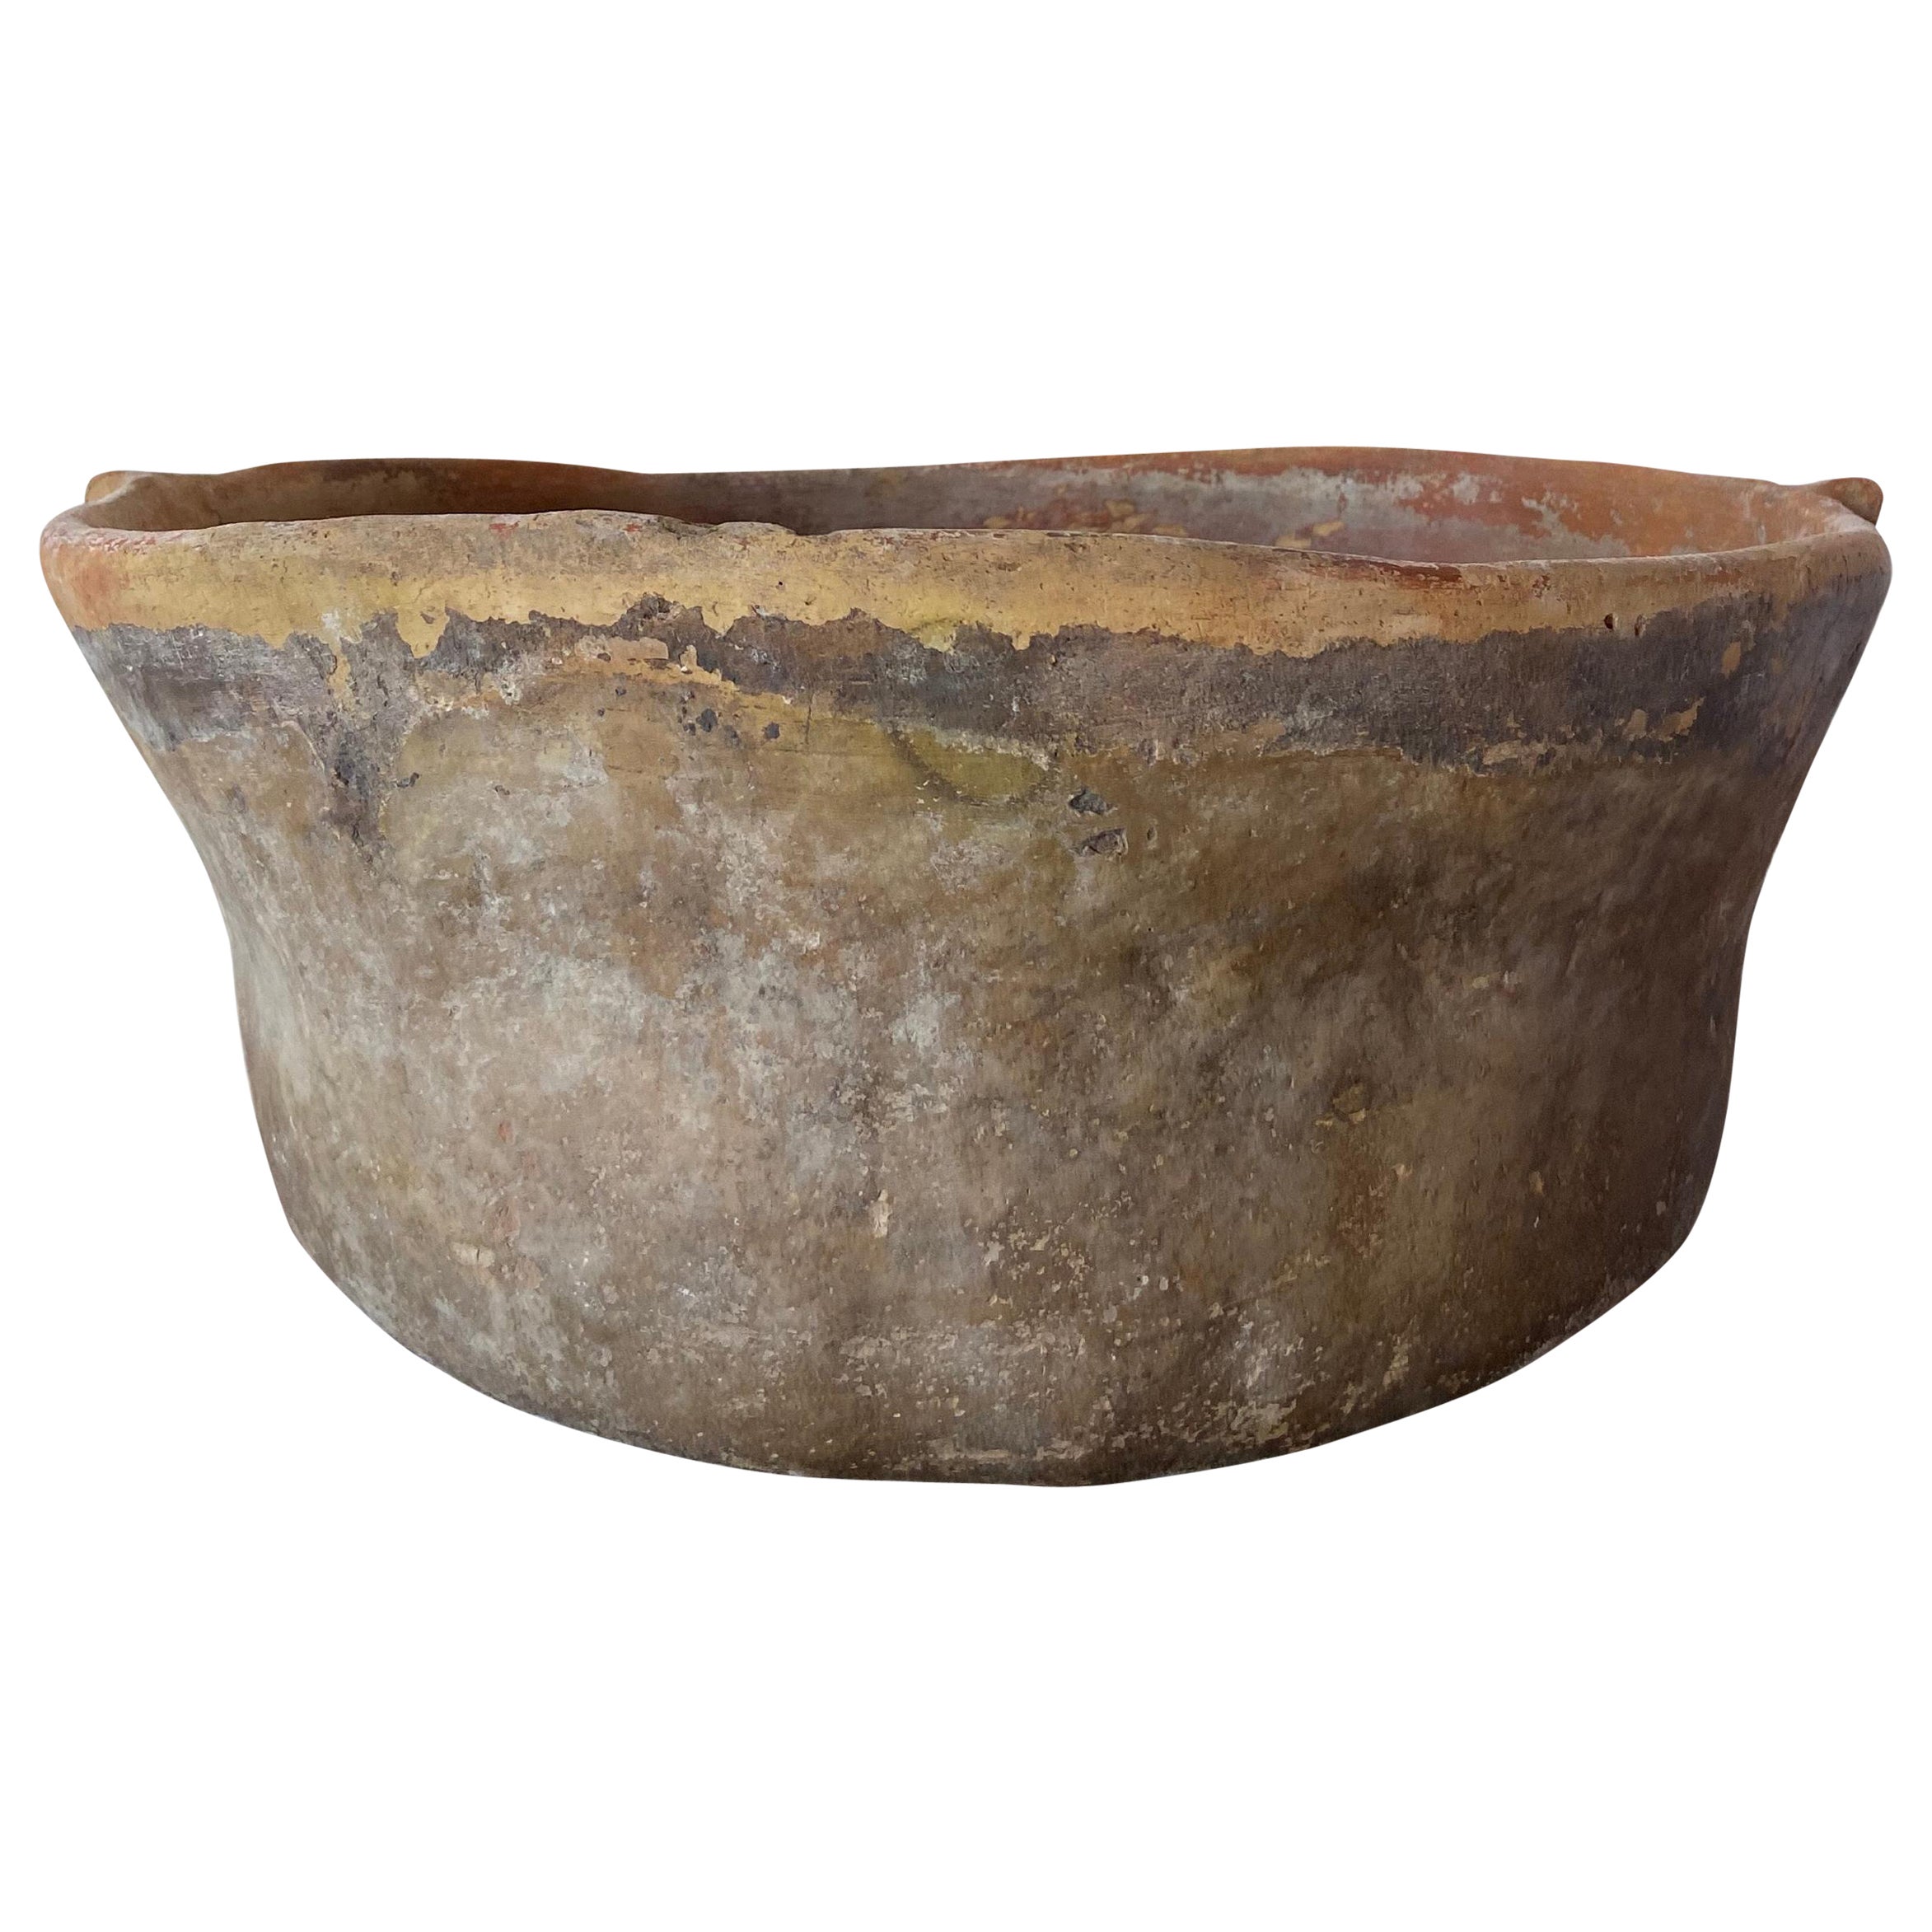 Terracotta Bowl From Mexico, Circa 1960´s